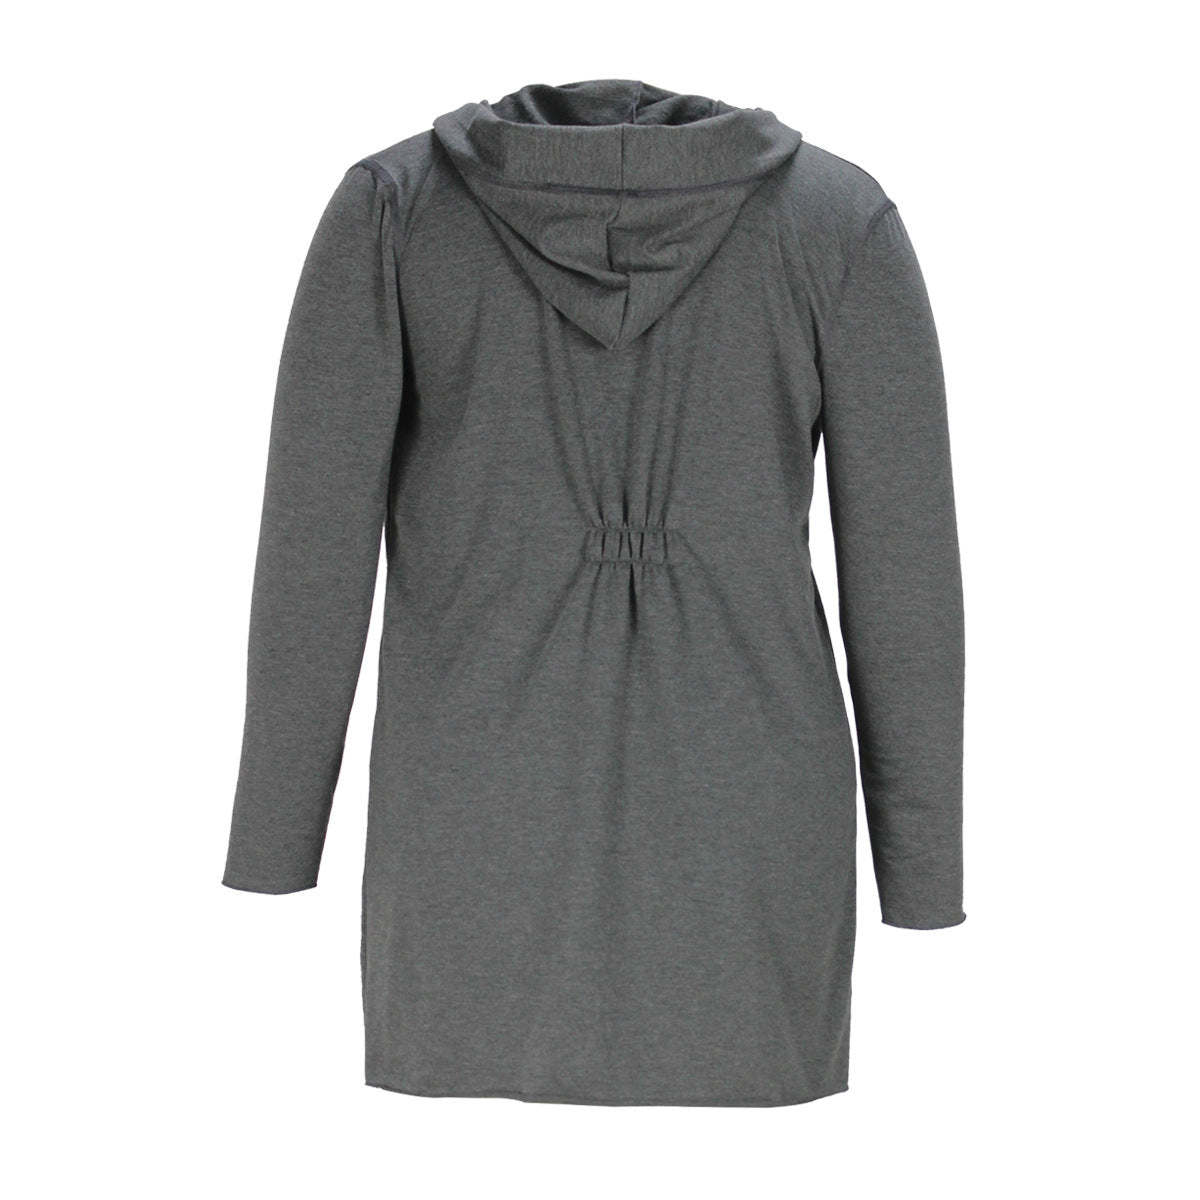 Plus Size Spring Autumn Casual Women Clothing One Button Cardigan V Neck Hooded Mid Length Top